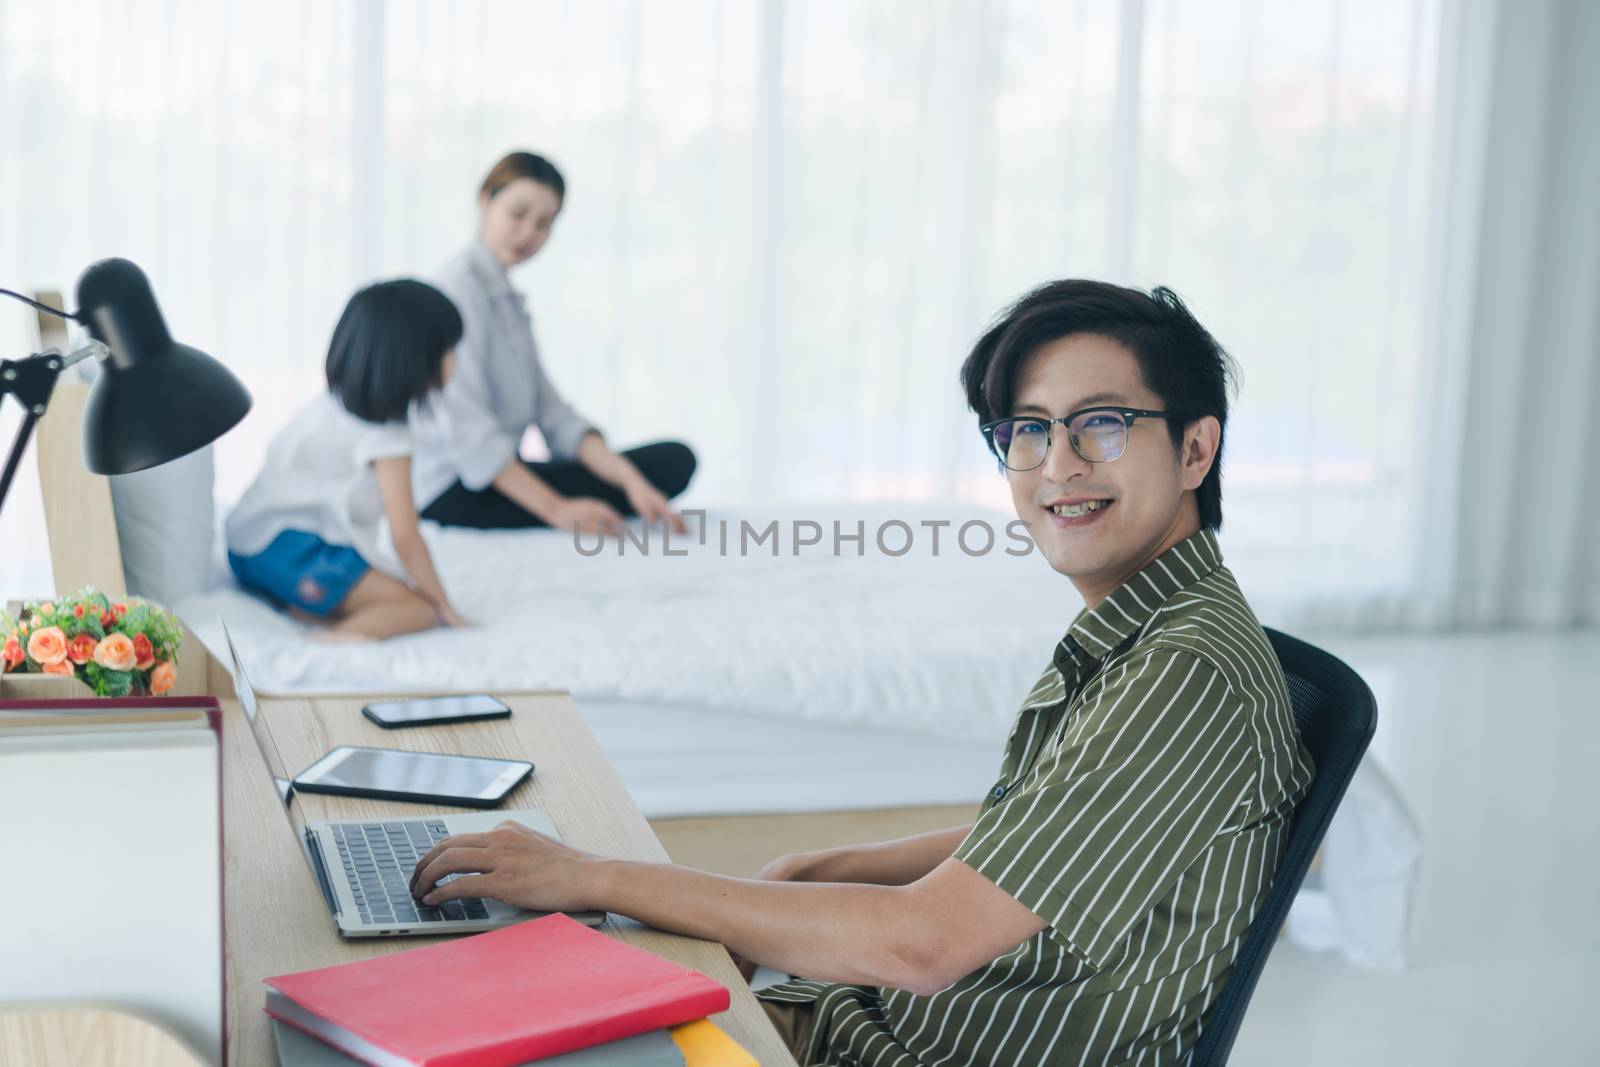 Work  from home - Concept. Photos of Asian families consisting of parents and daughters. Parents working at home and raising children as well. The little daughter who is playing mischievously